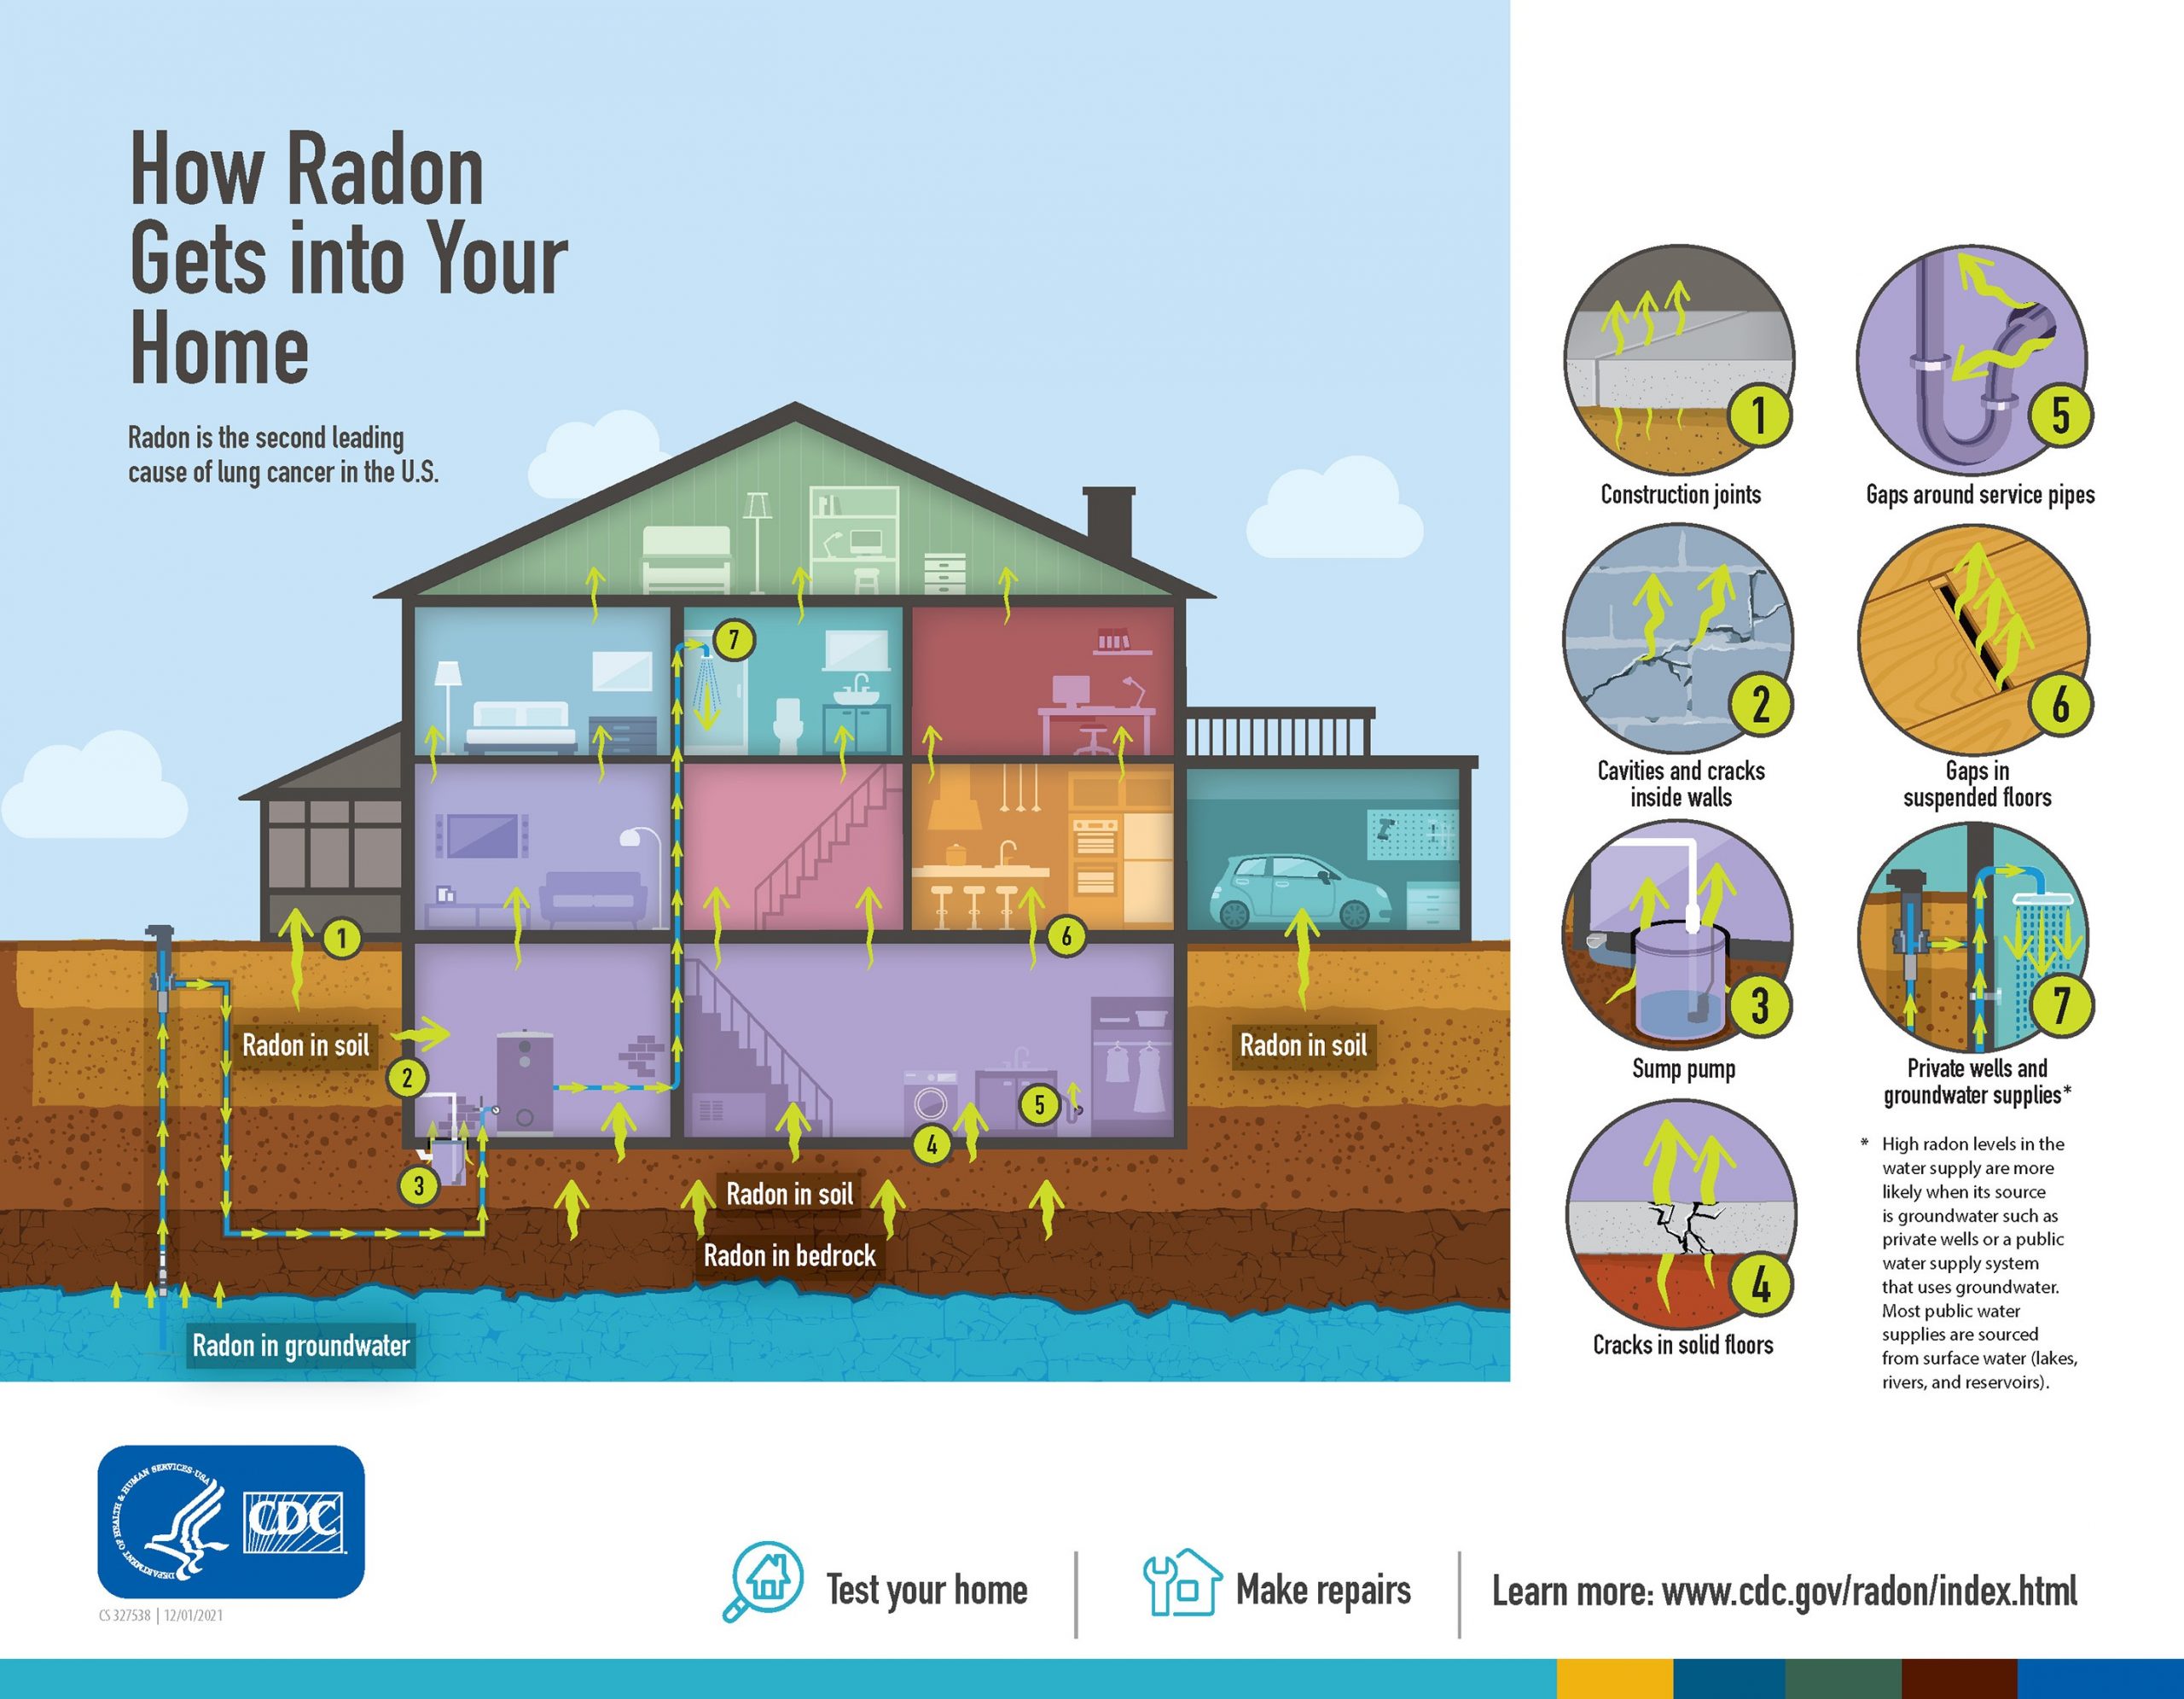 Make a radon measurement - buy reliable test kits for your house today